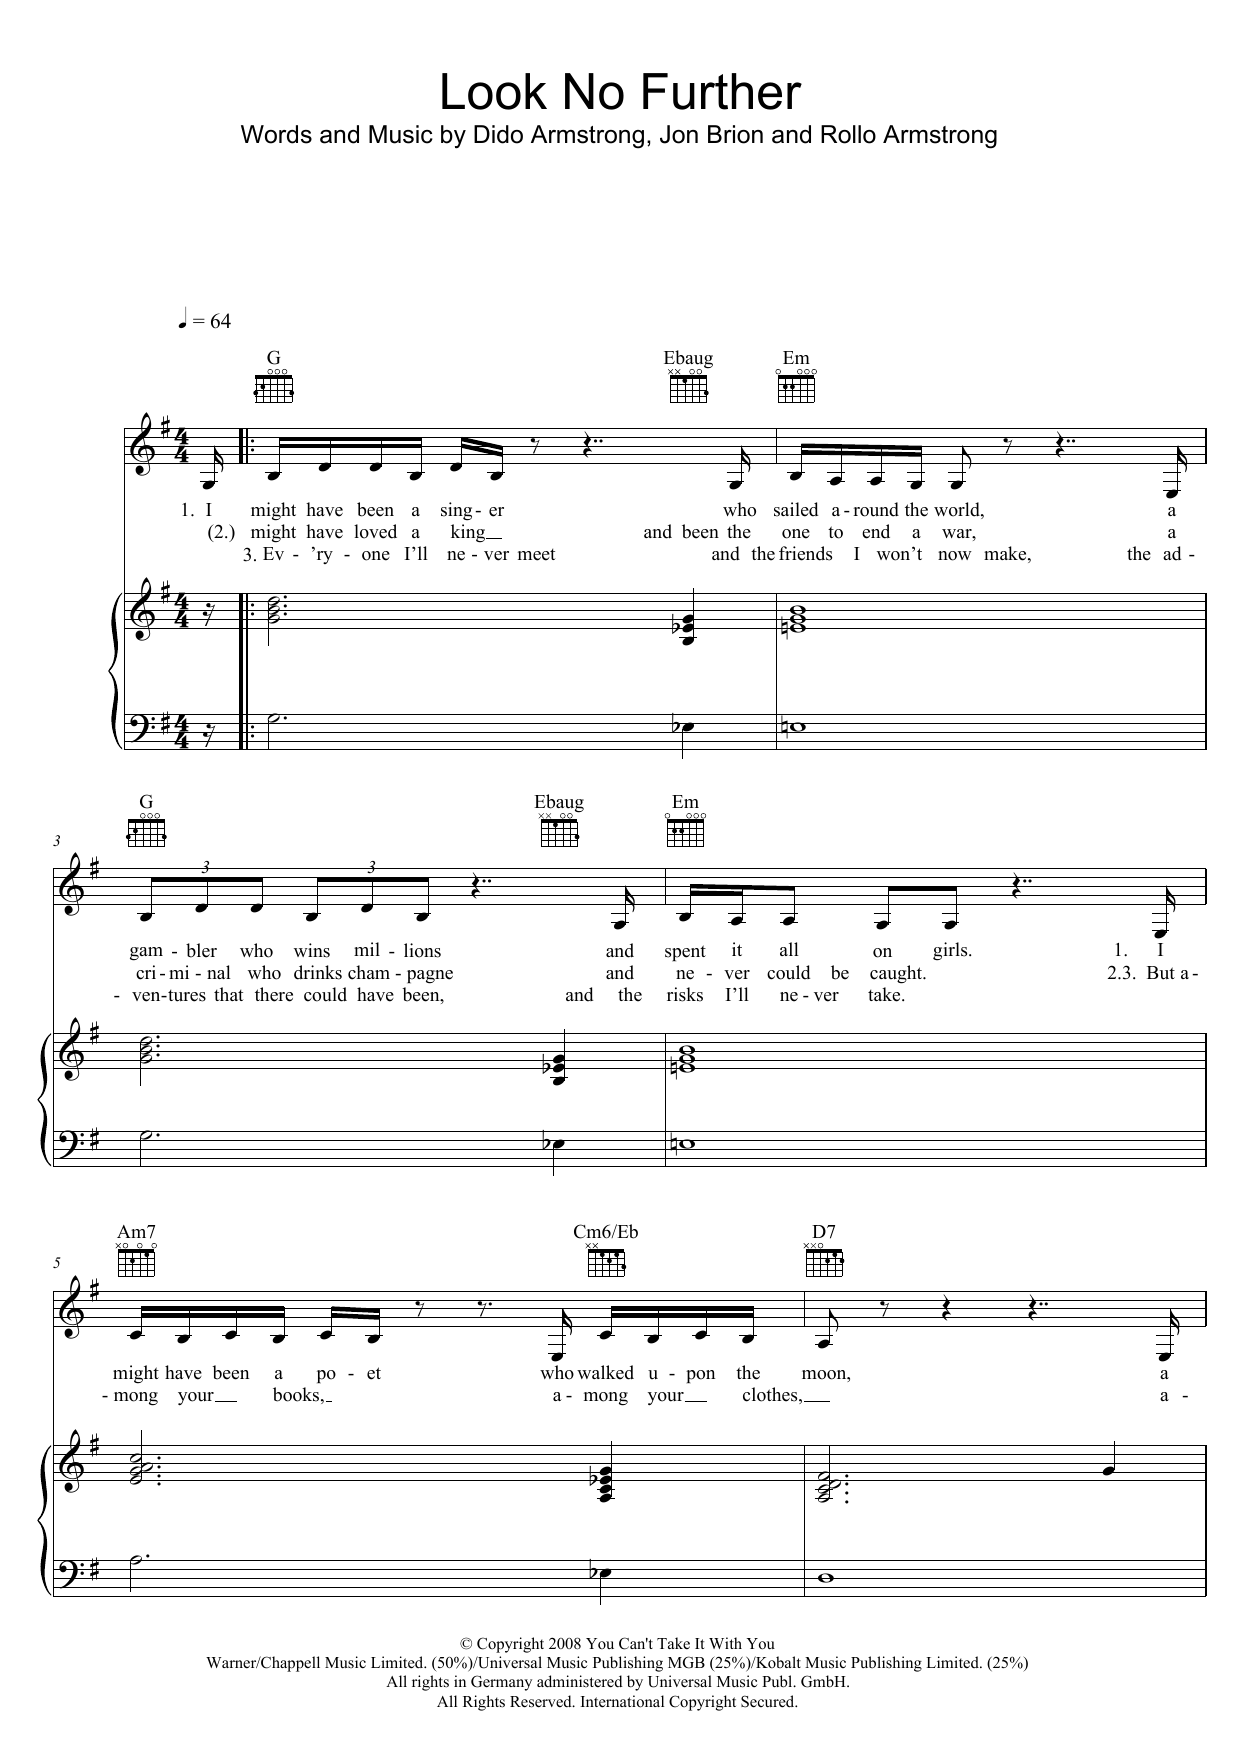 Download Dido Look No Further Sheet Music